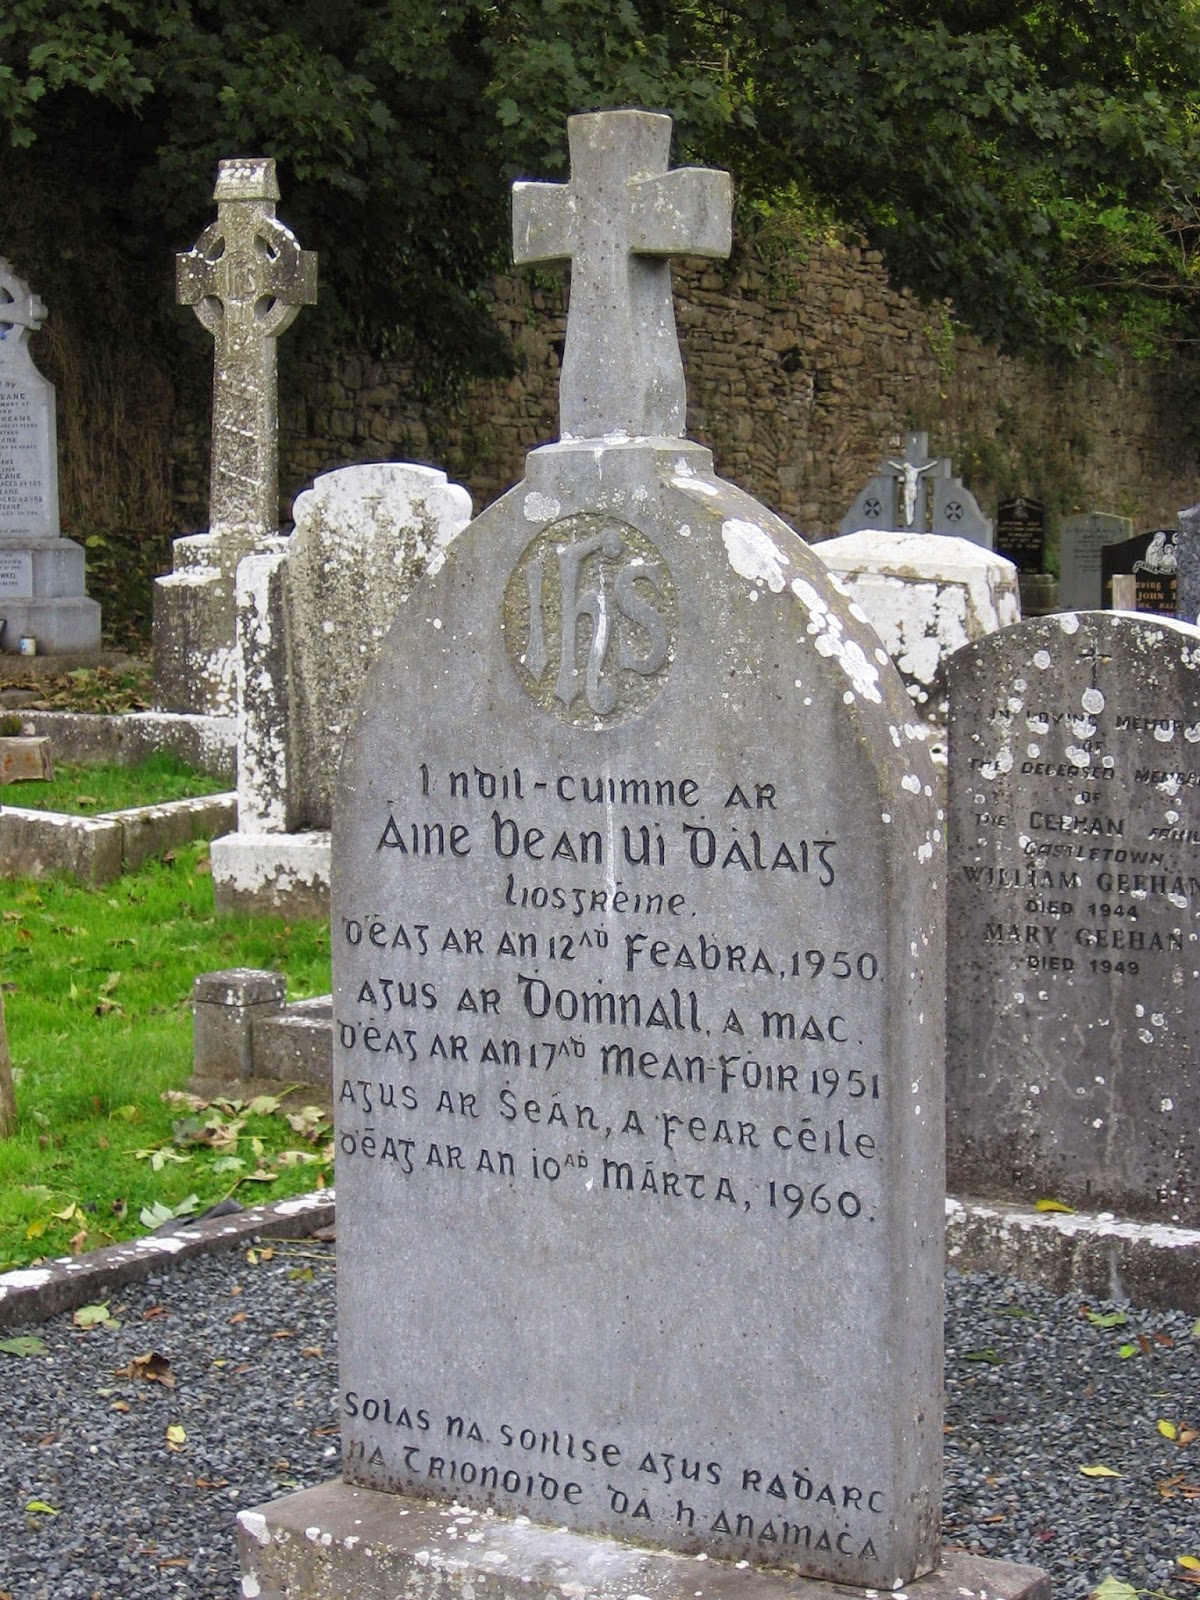 1950s headstone engraved in Irish language found at Castletown Catholic church ruins in southern County Limerick